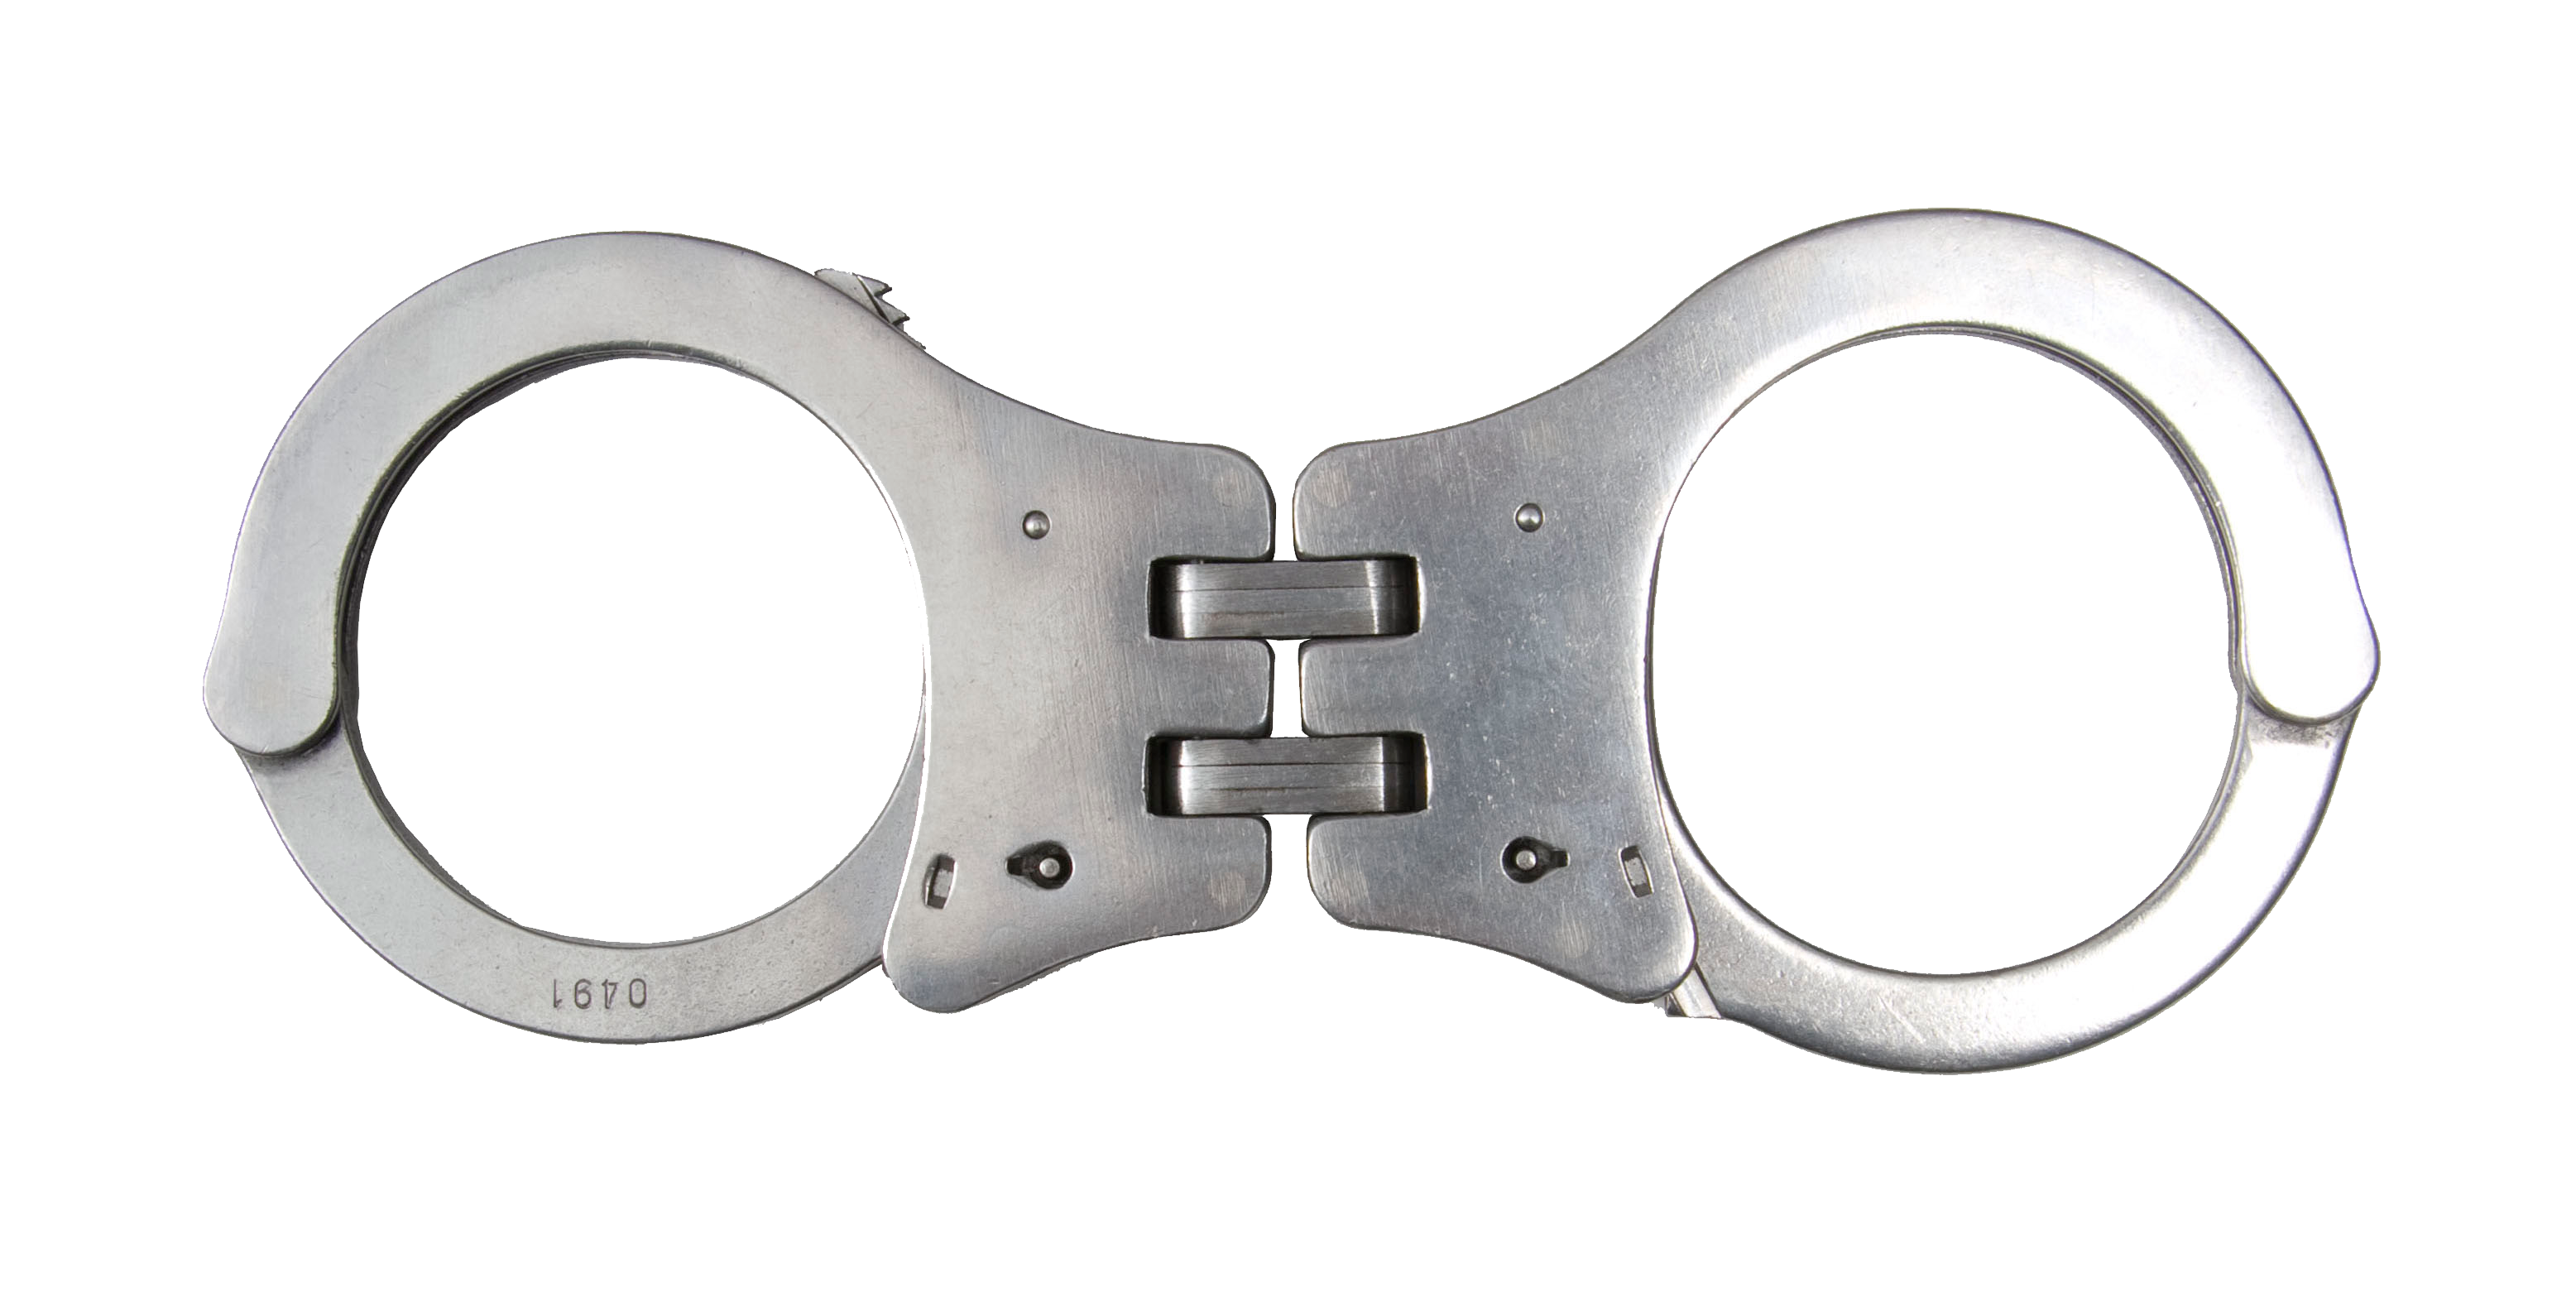 Arrestment Handcuffs PNG Image